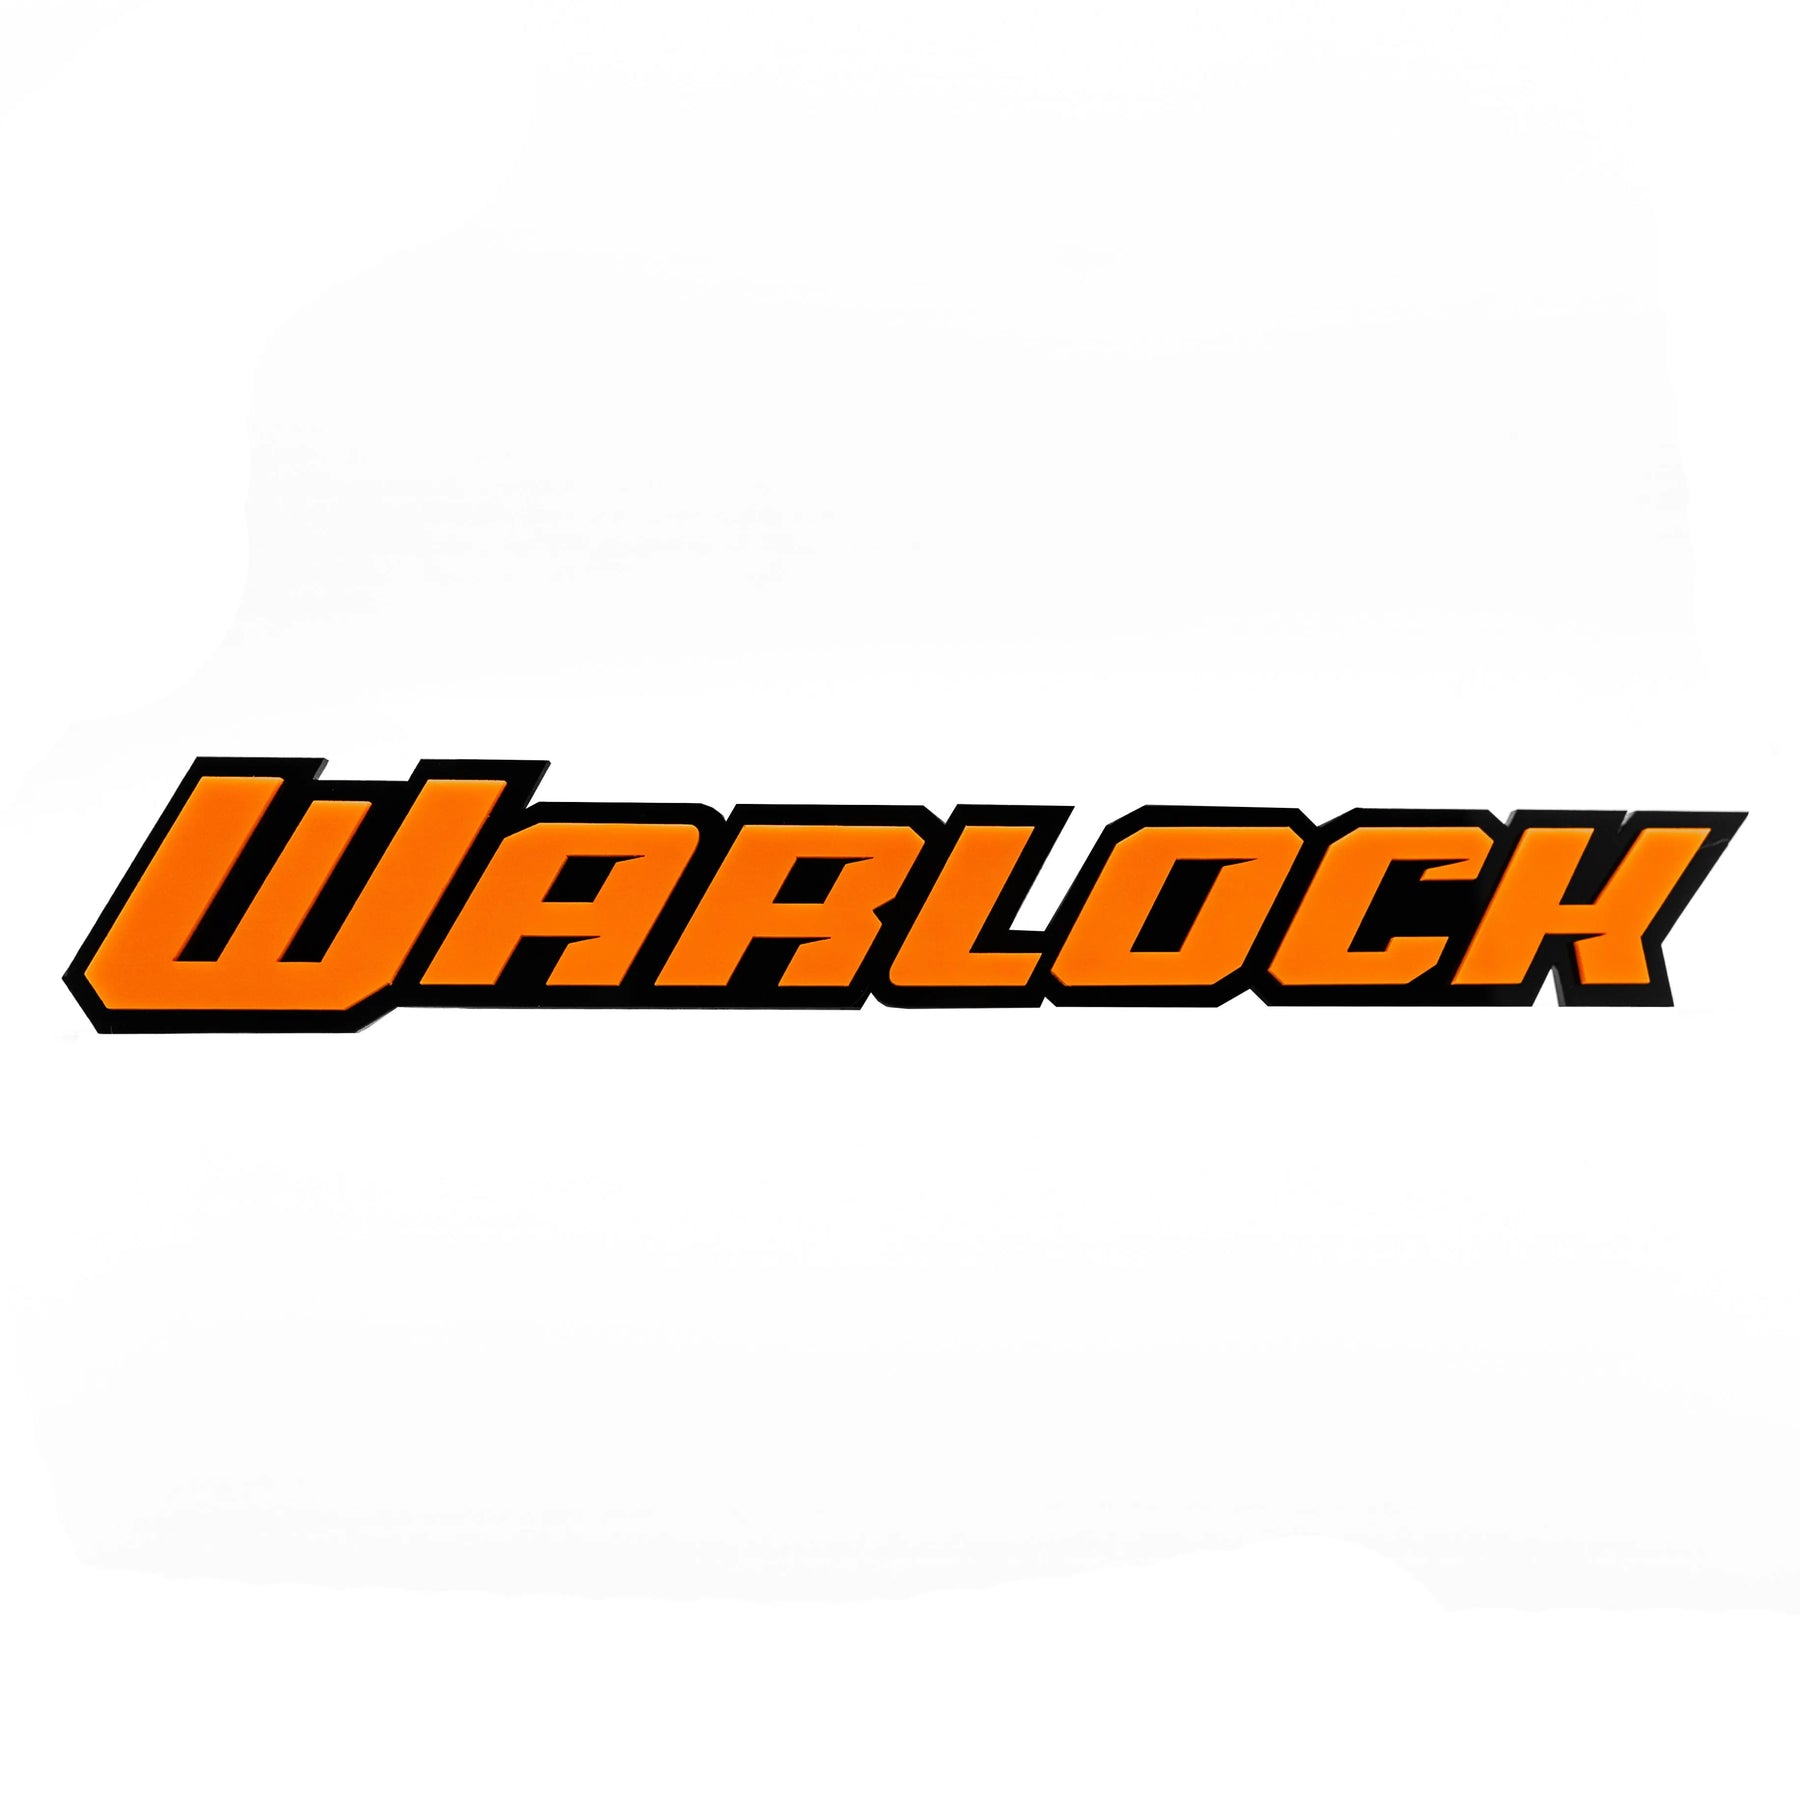 Custom Warlock® Dual Layer Truck Badge - Multiple Colors Available - Officially Licensed Product